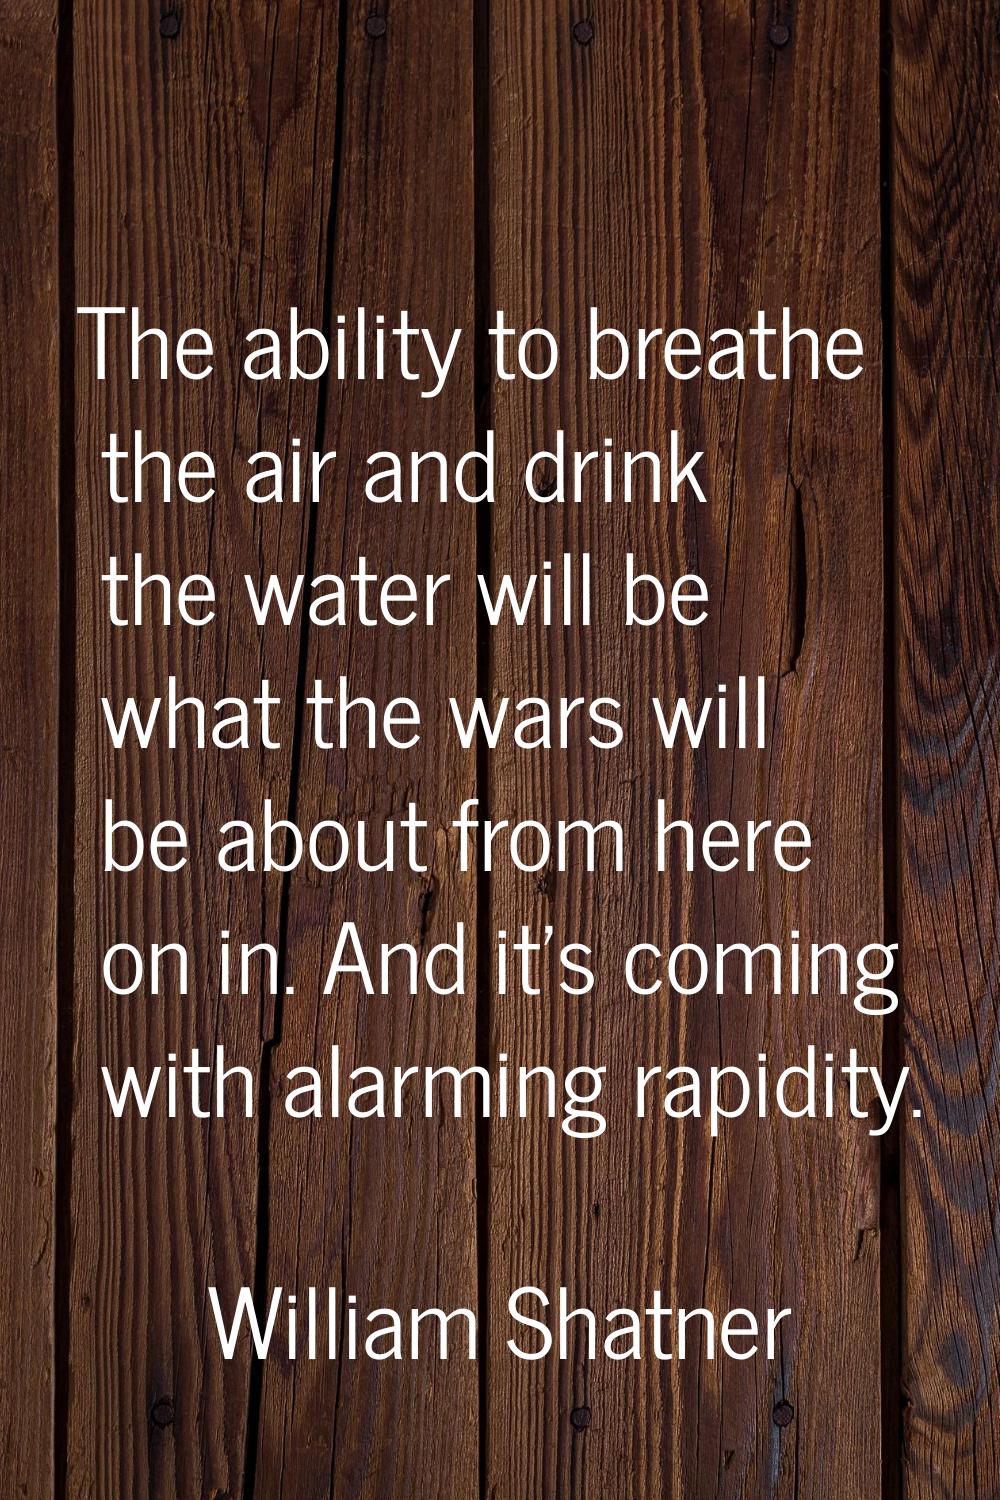 The ability to breathe the air and drink the water will be what the wars will be about from here on